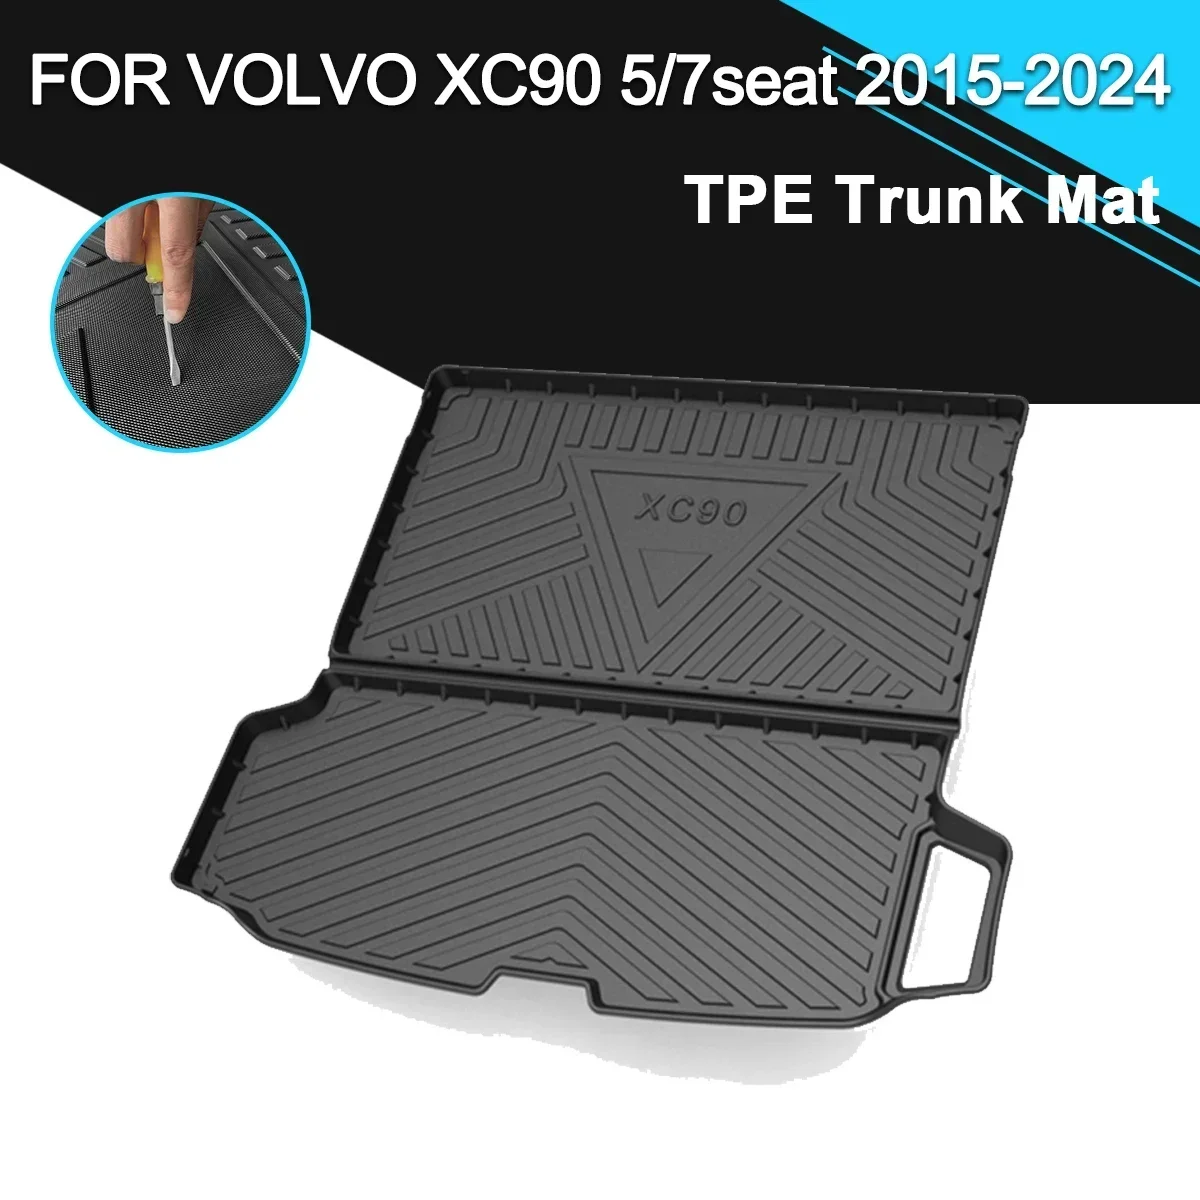 

Car Rear Trunk Cover Mat Rubber TPE Waterproof Non-Slip Cargo Liner Accessories For Volvo XC90 5/7 Seater 2015-2024